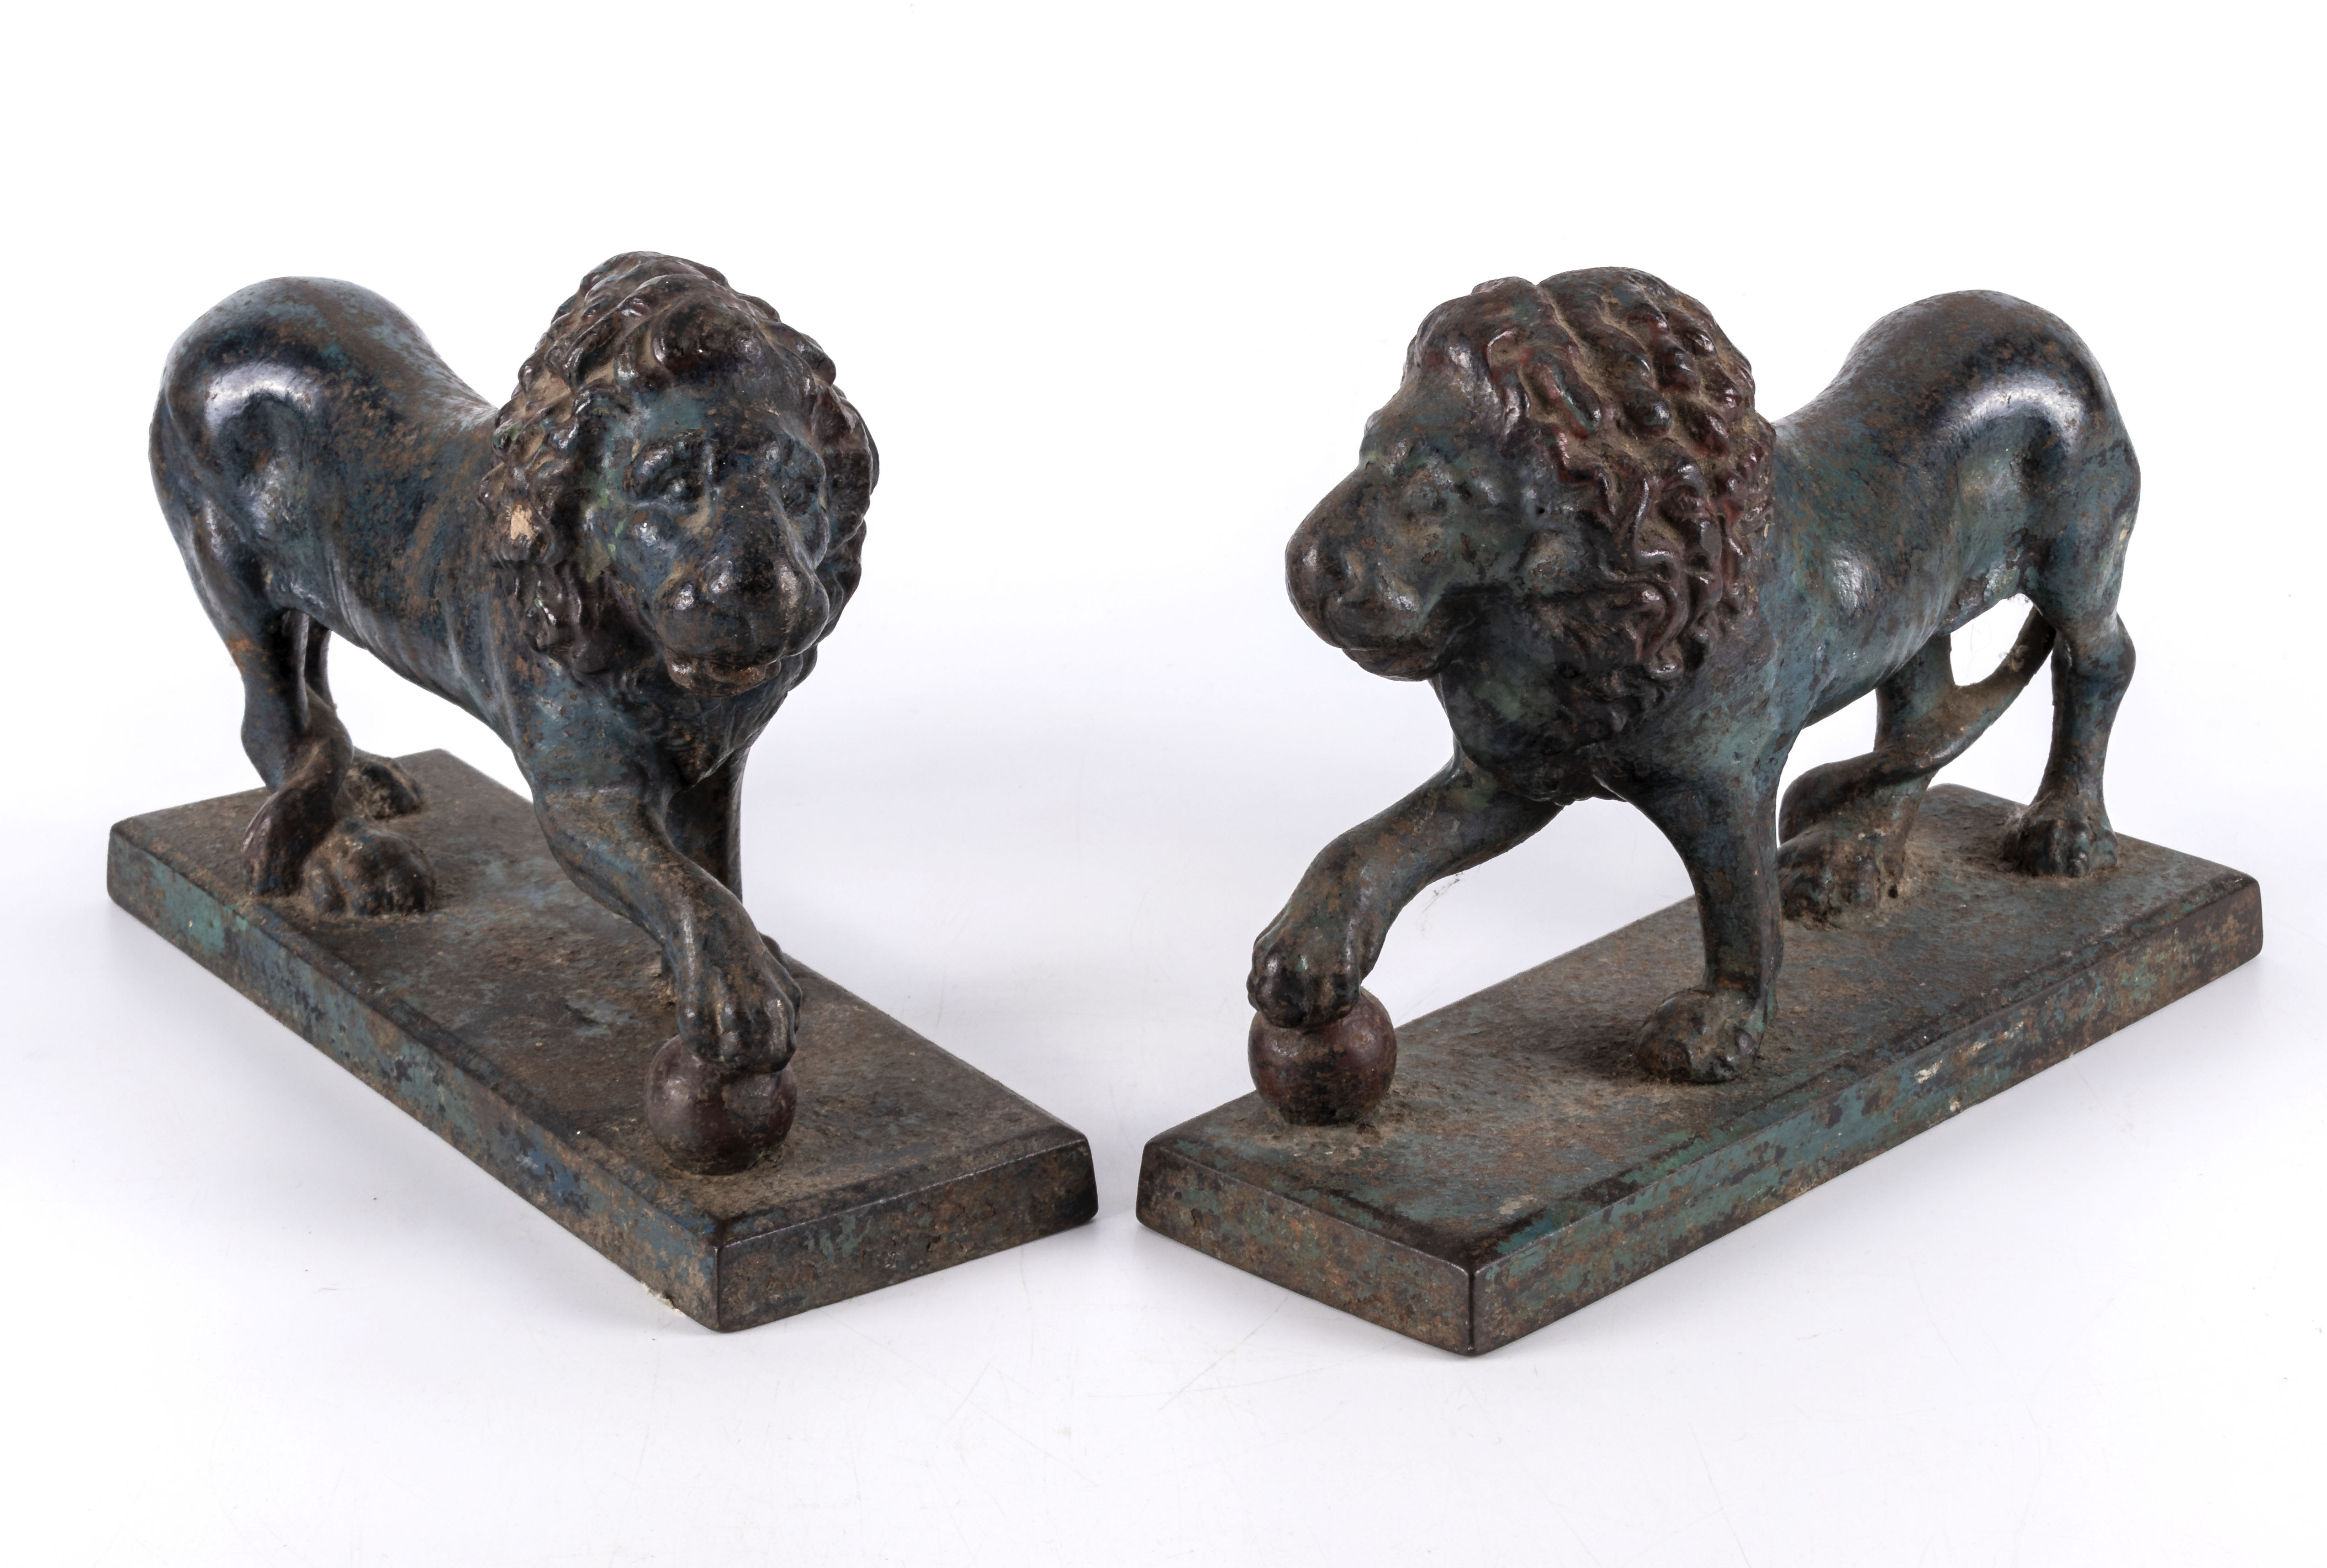 Grand tour a pair of cold painted cast iron Medici lions, 9.5" long x 7" tall x 3" wide